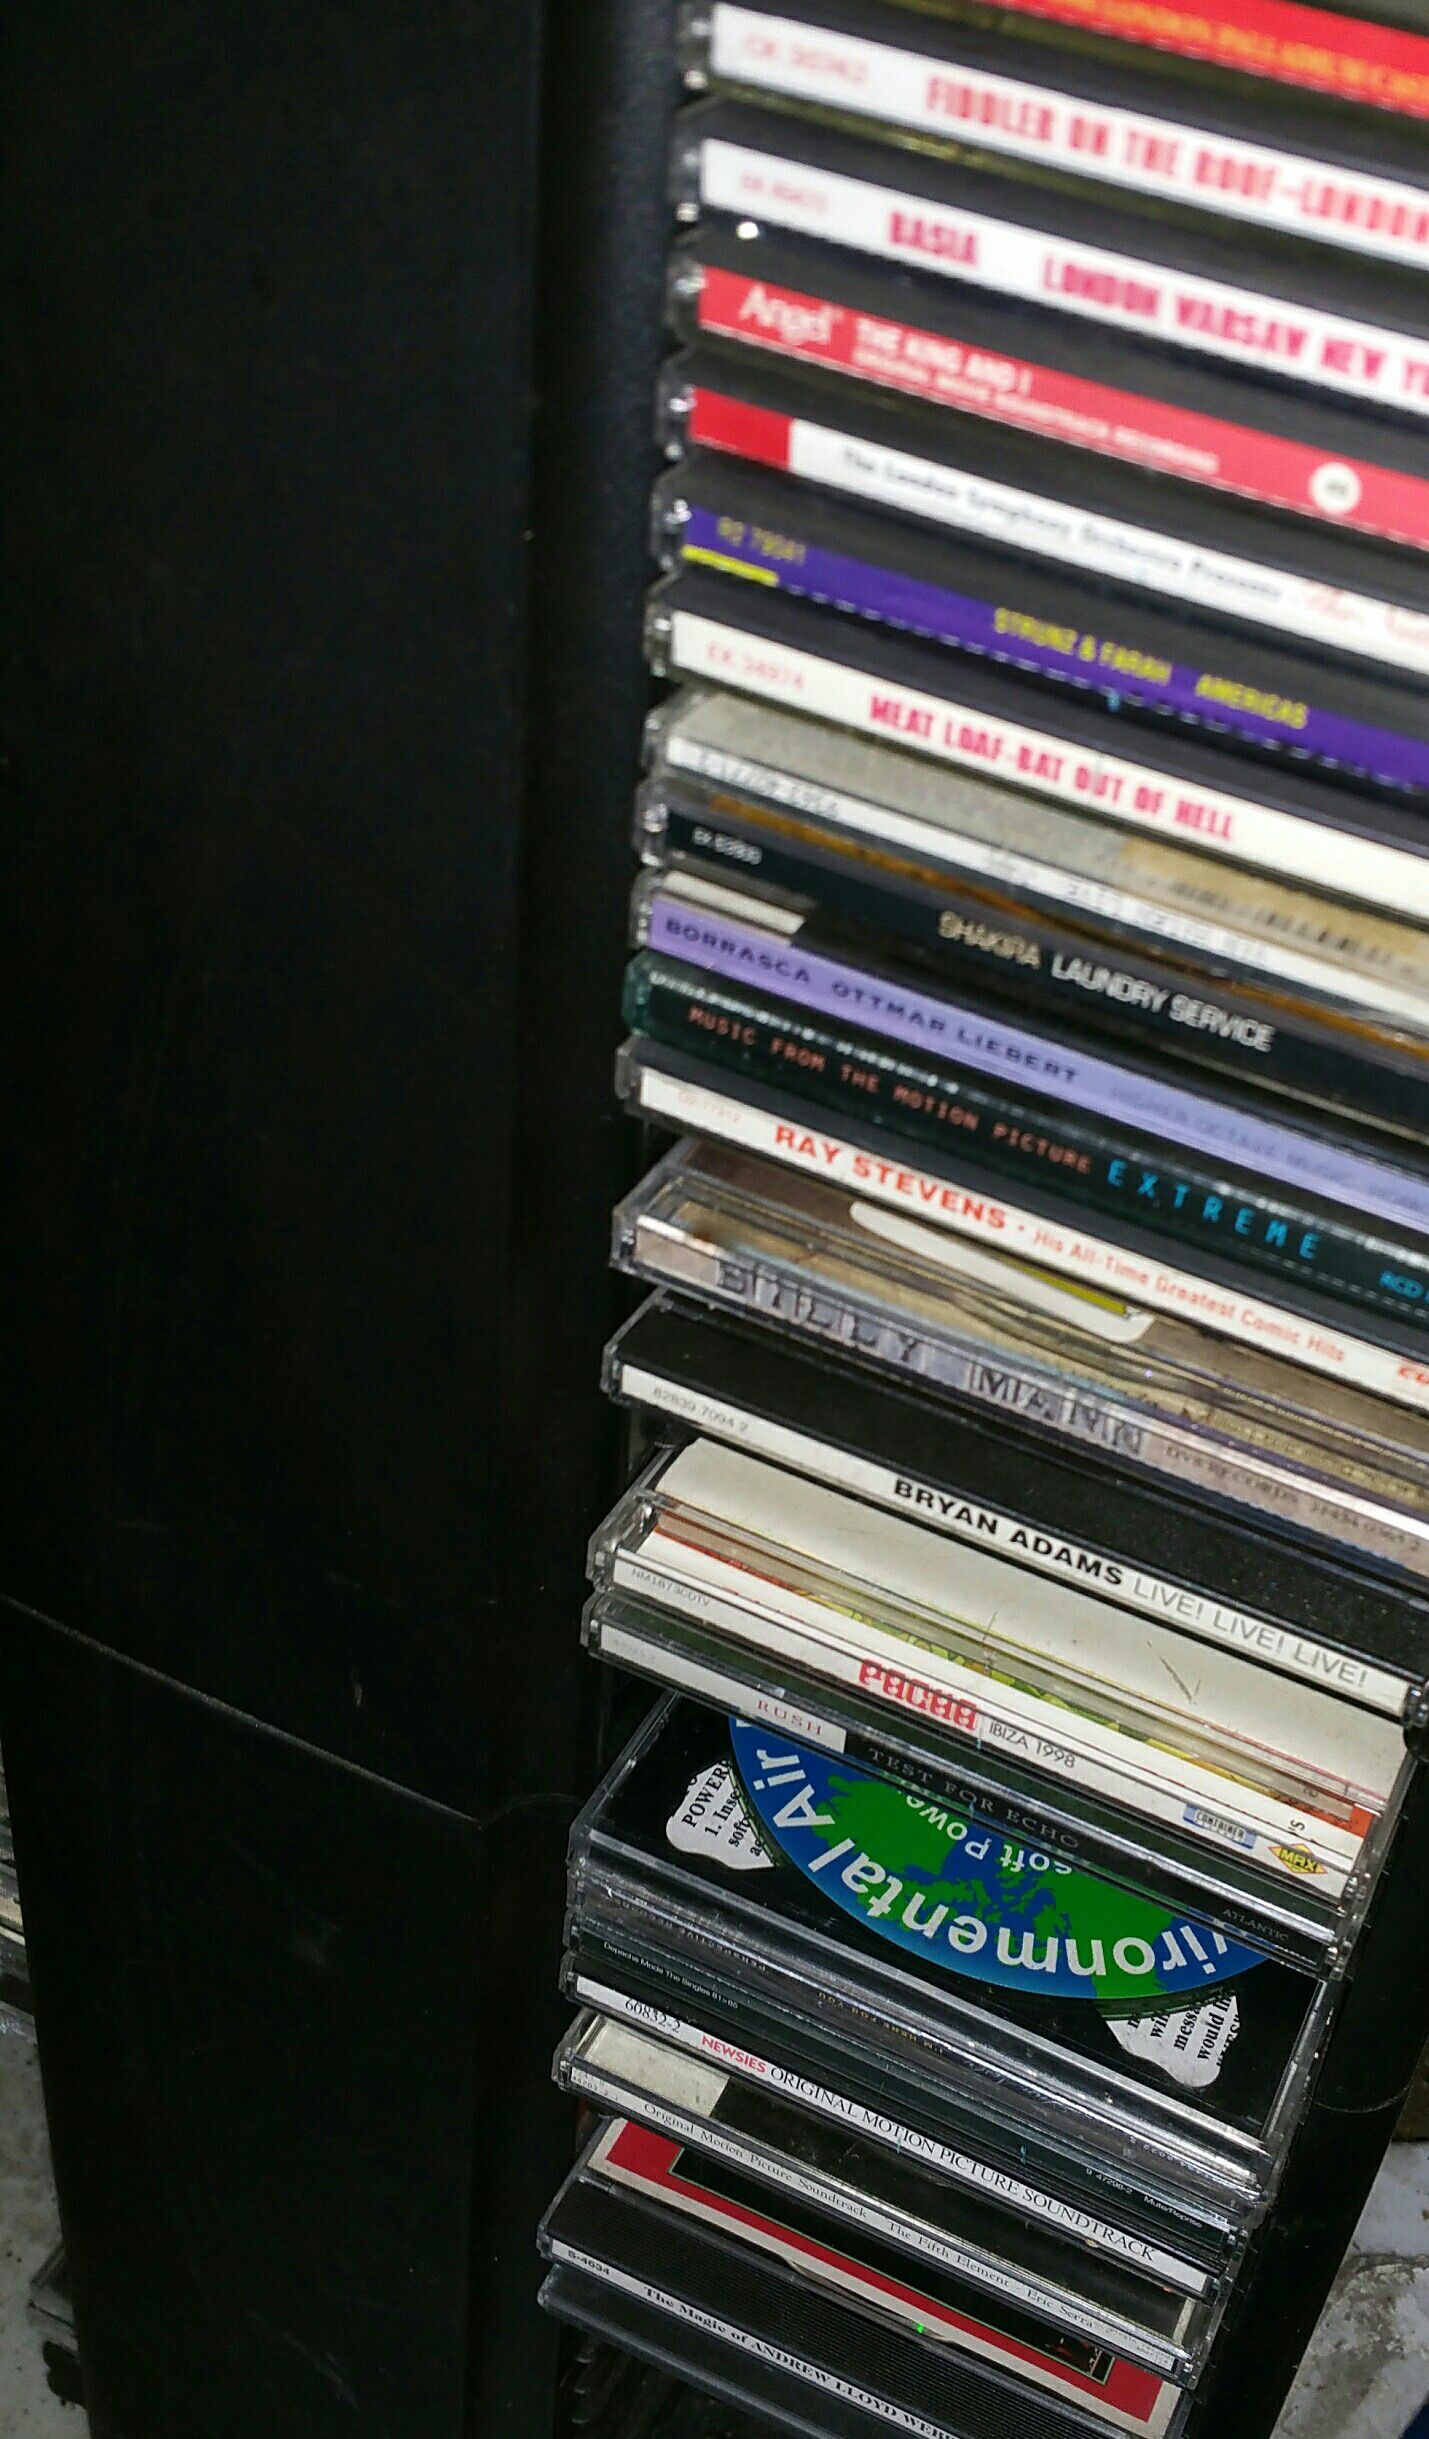 Free CD'S, VHS and some movies